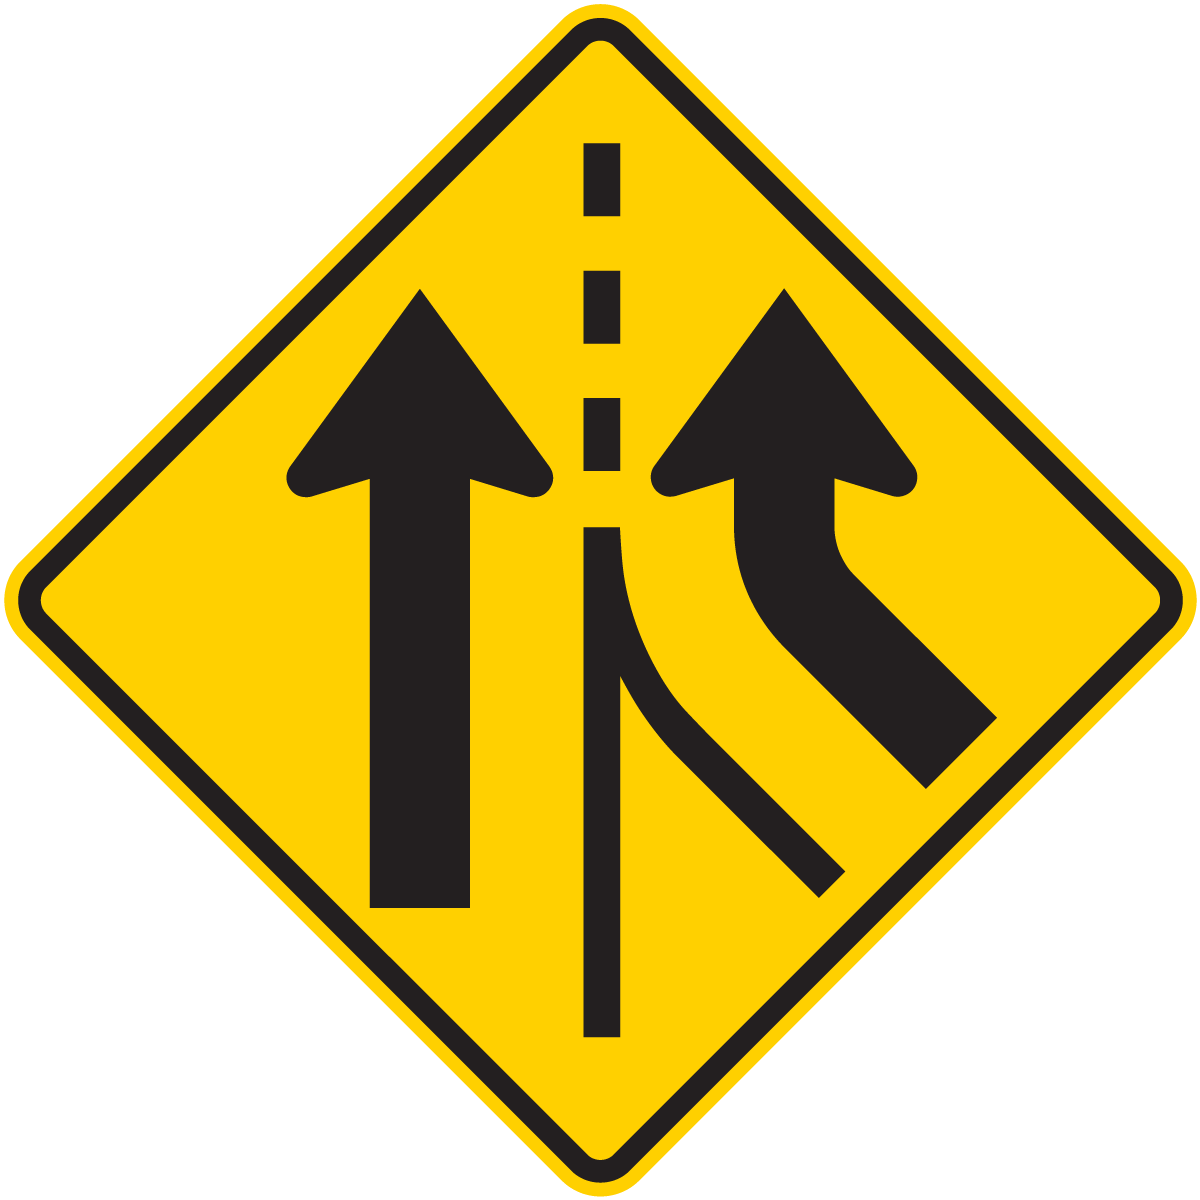 W4-3 Added Lane (Left or Right)